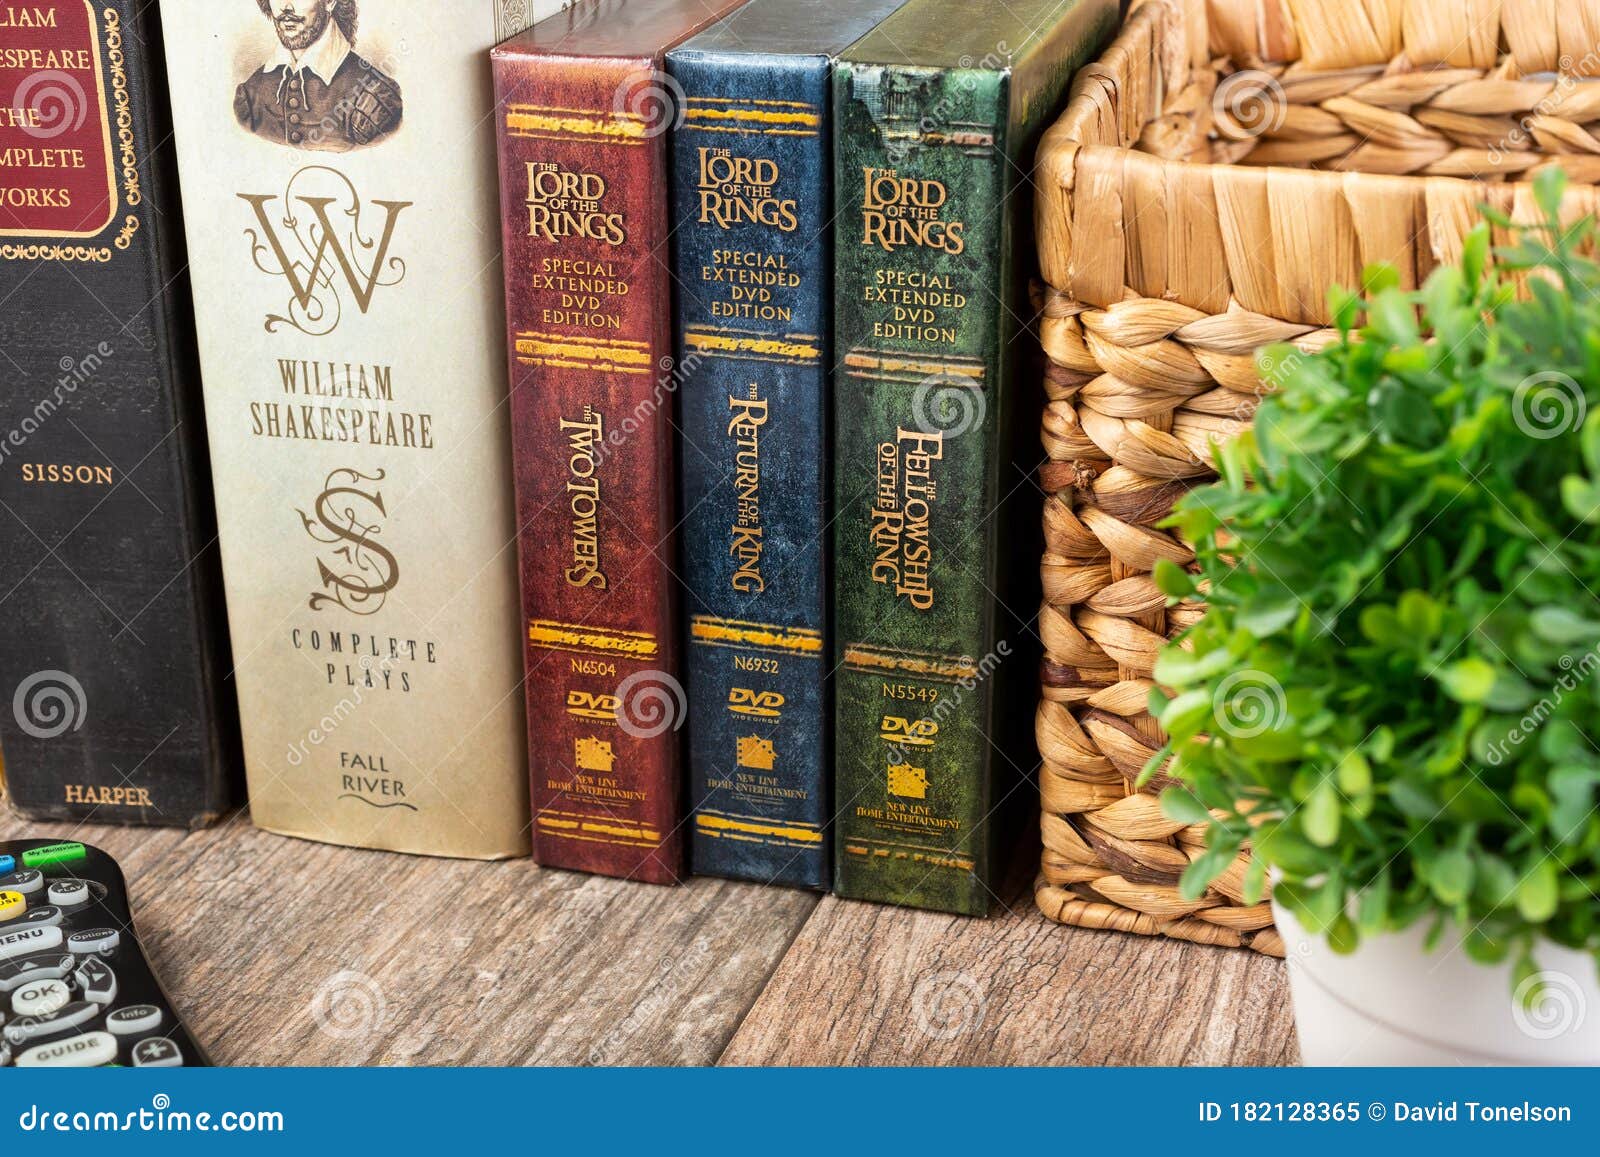 lord of rings books